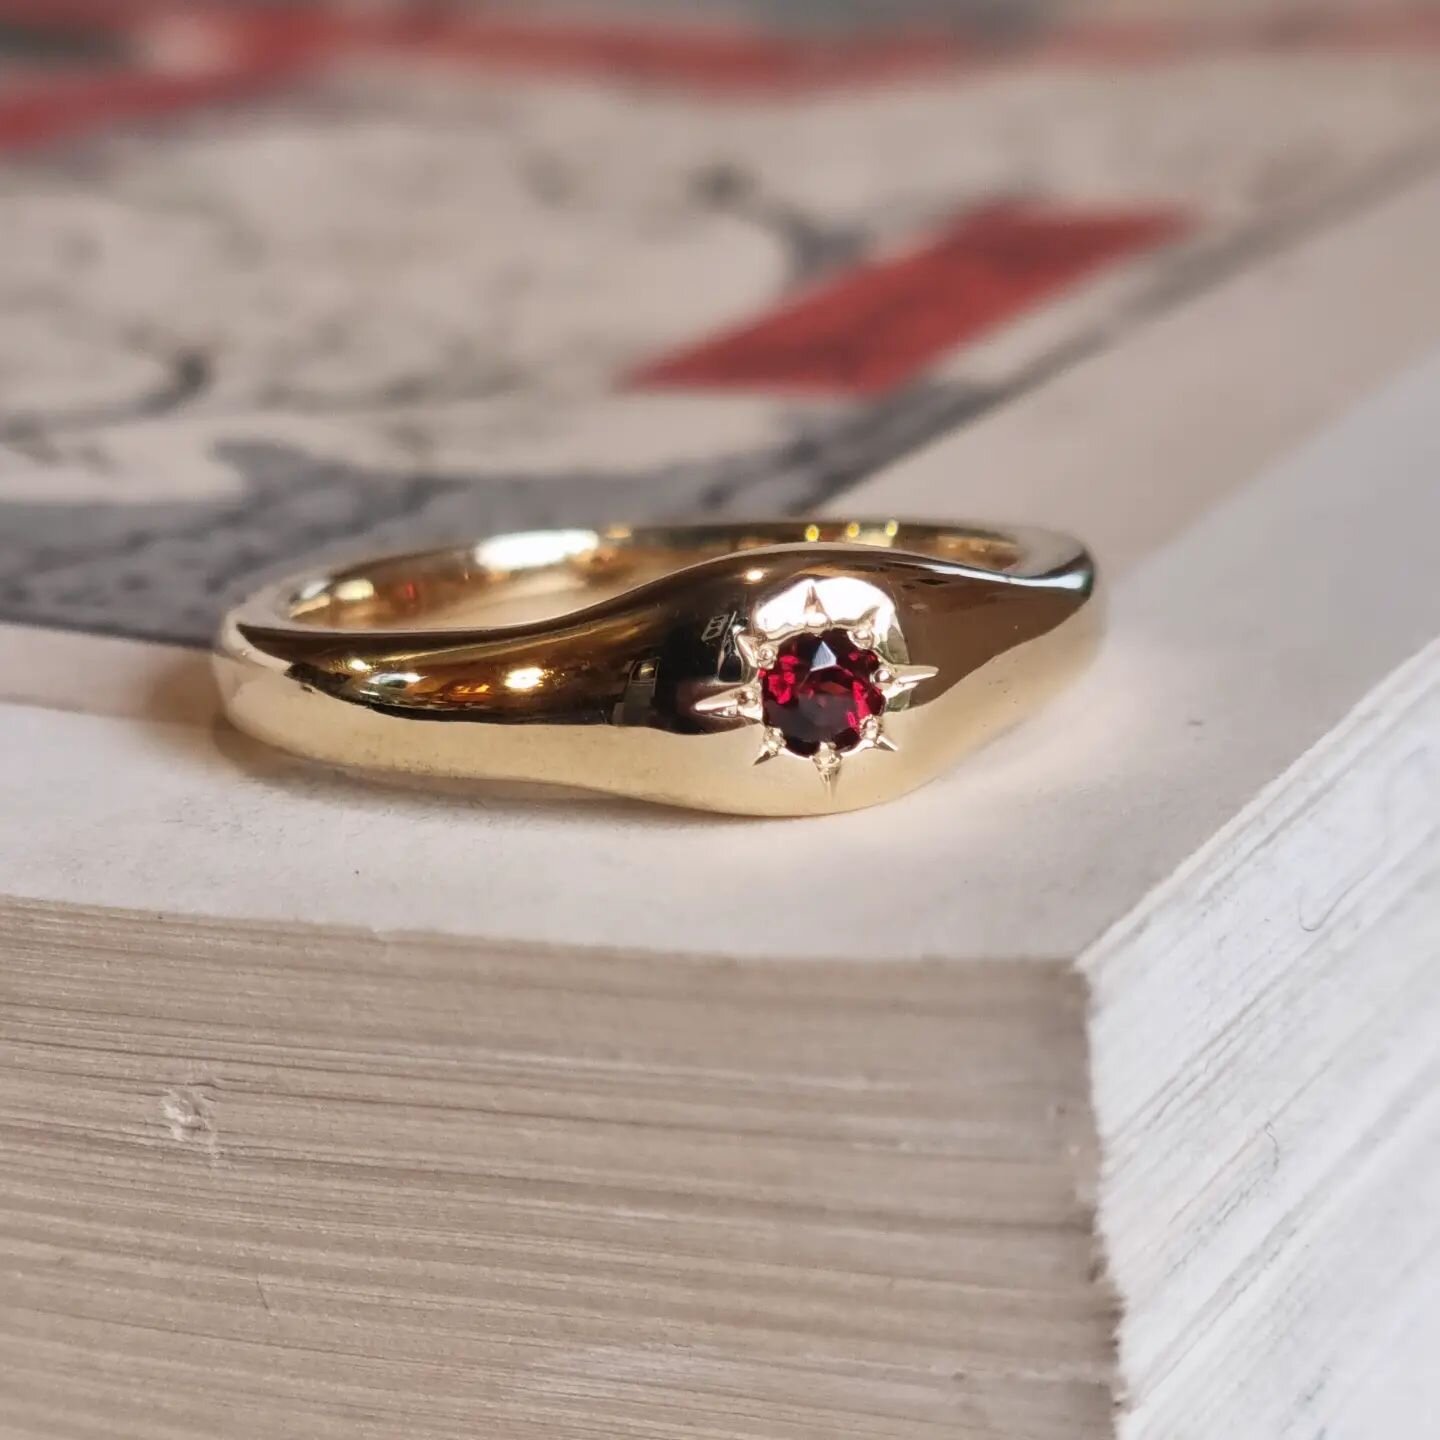 I really enjoyed making this star set pinky ring last year for my brother in law using heirloom gold. The ring was inspired by the gold and garnet signet ring that his father used to wear. This garnet is new as the old one was so warn, but set in a s